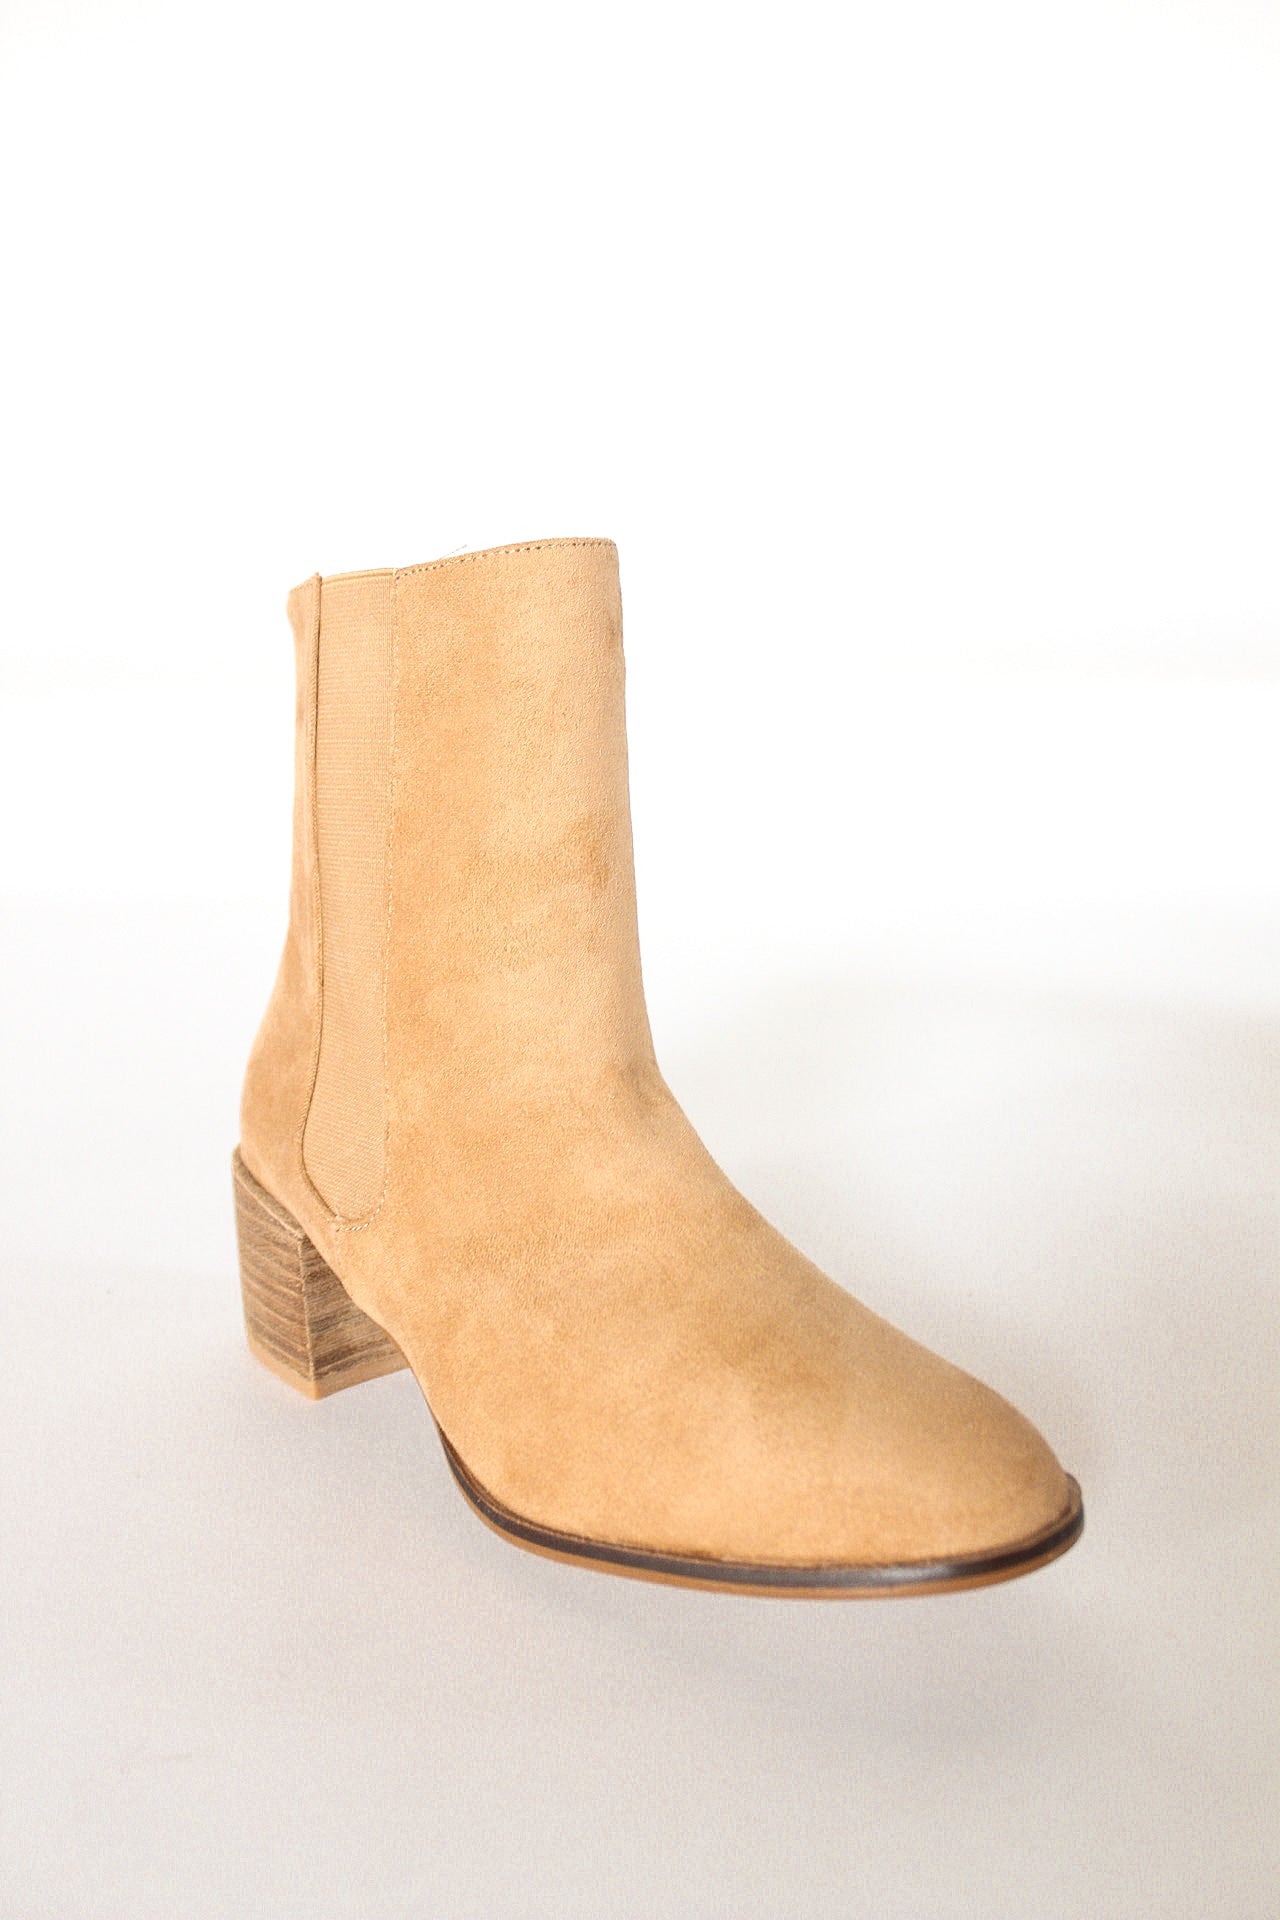 The Rory Suede Bootie